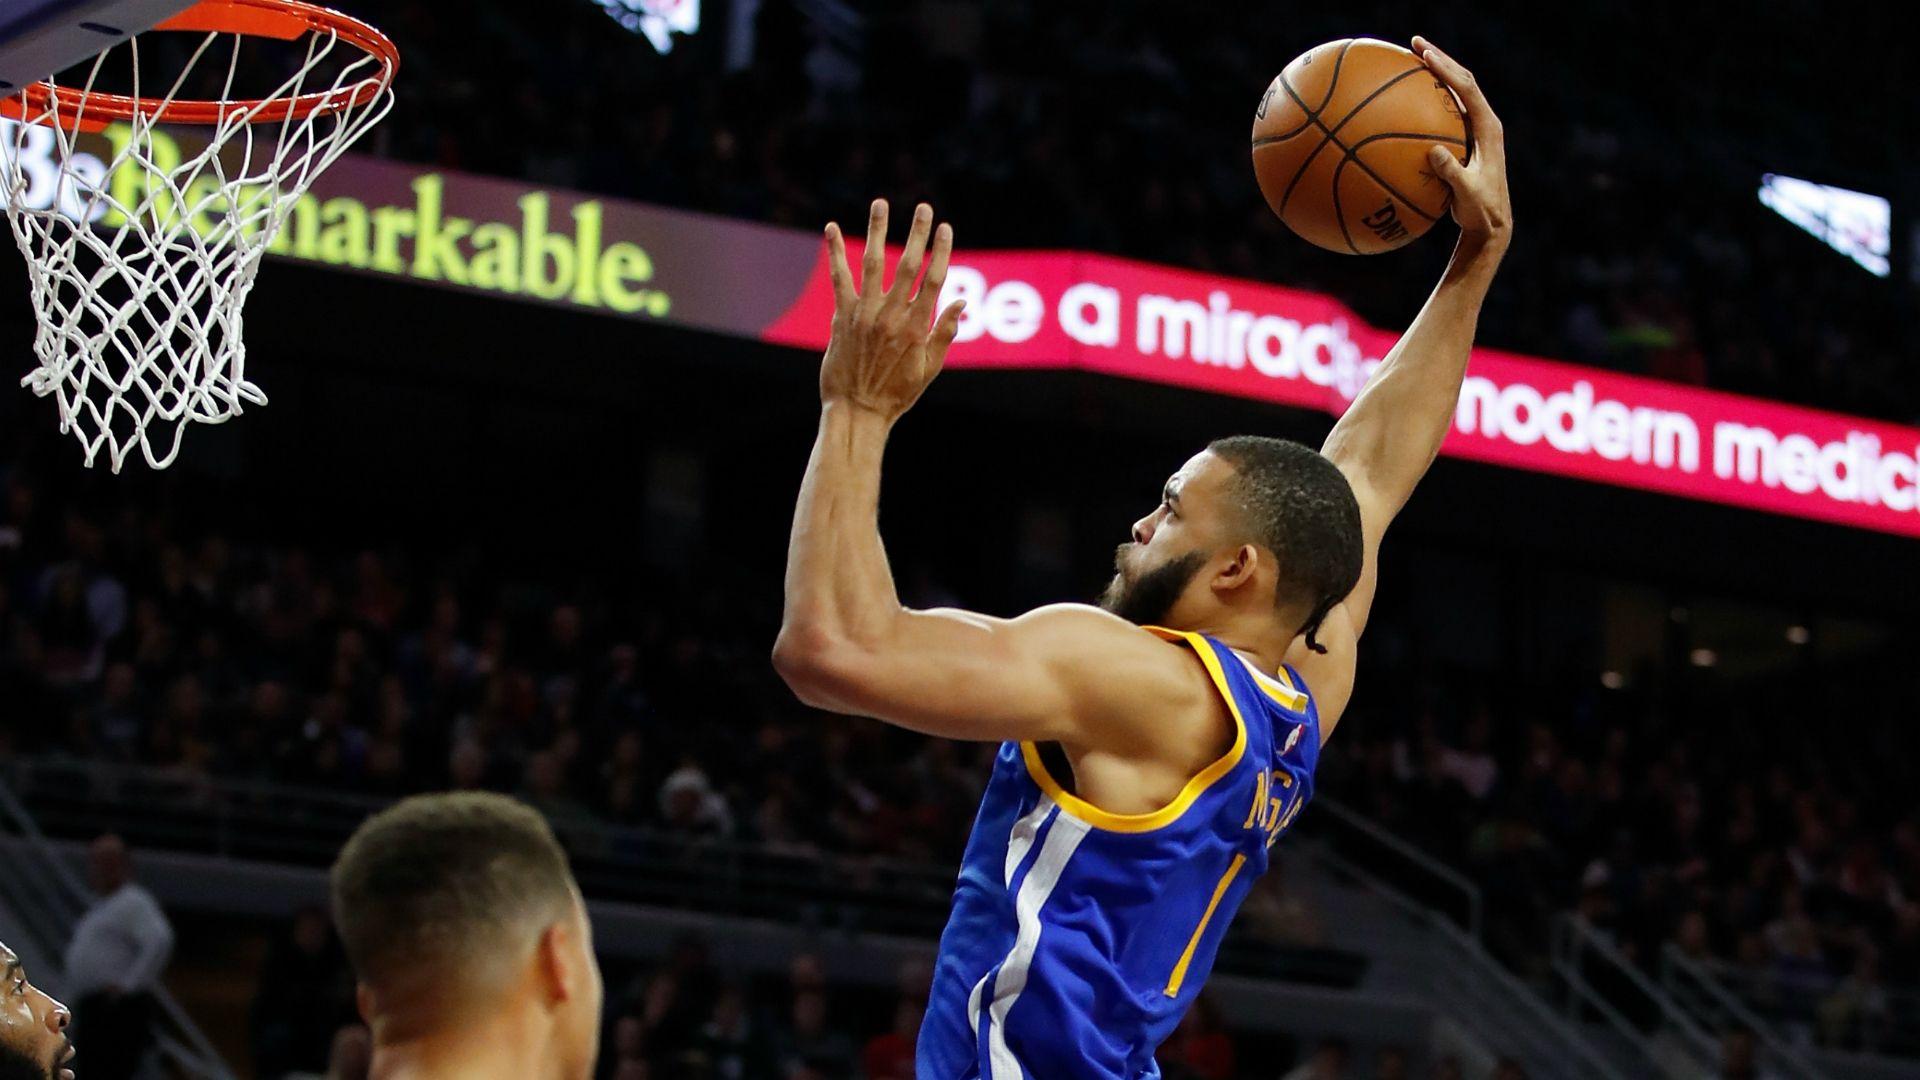 NBA free agency: JaVale McGee to meet with Clippers, per report